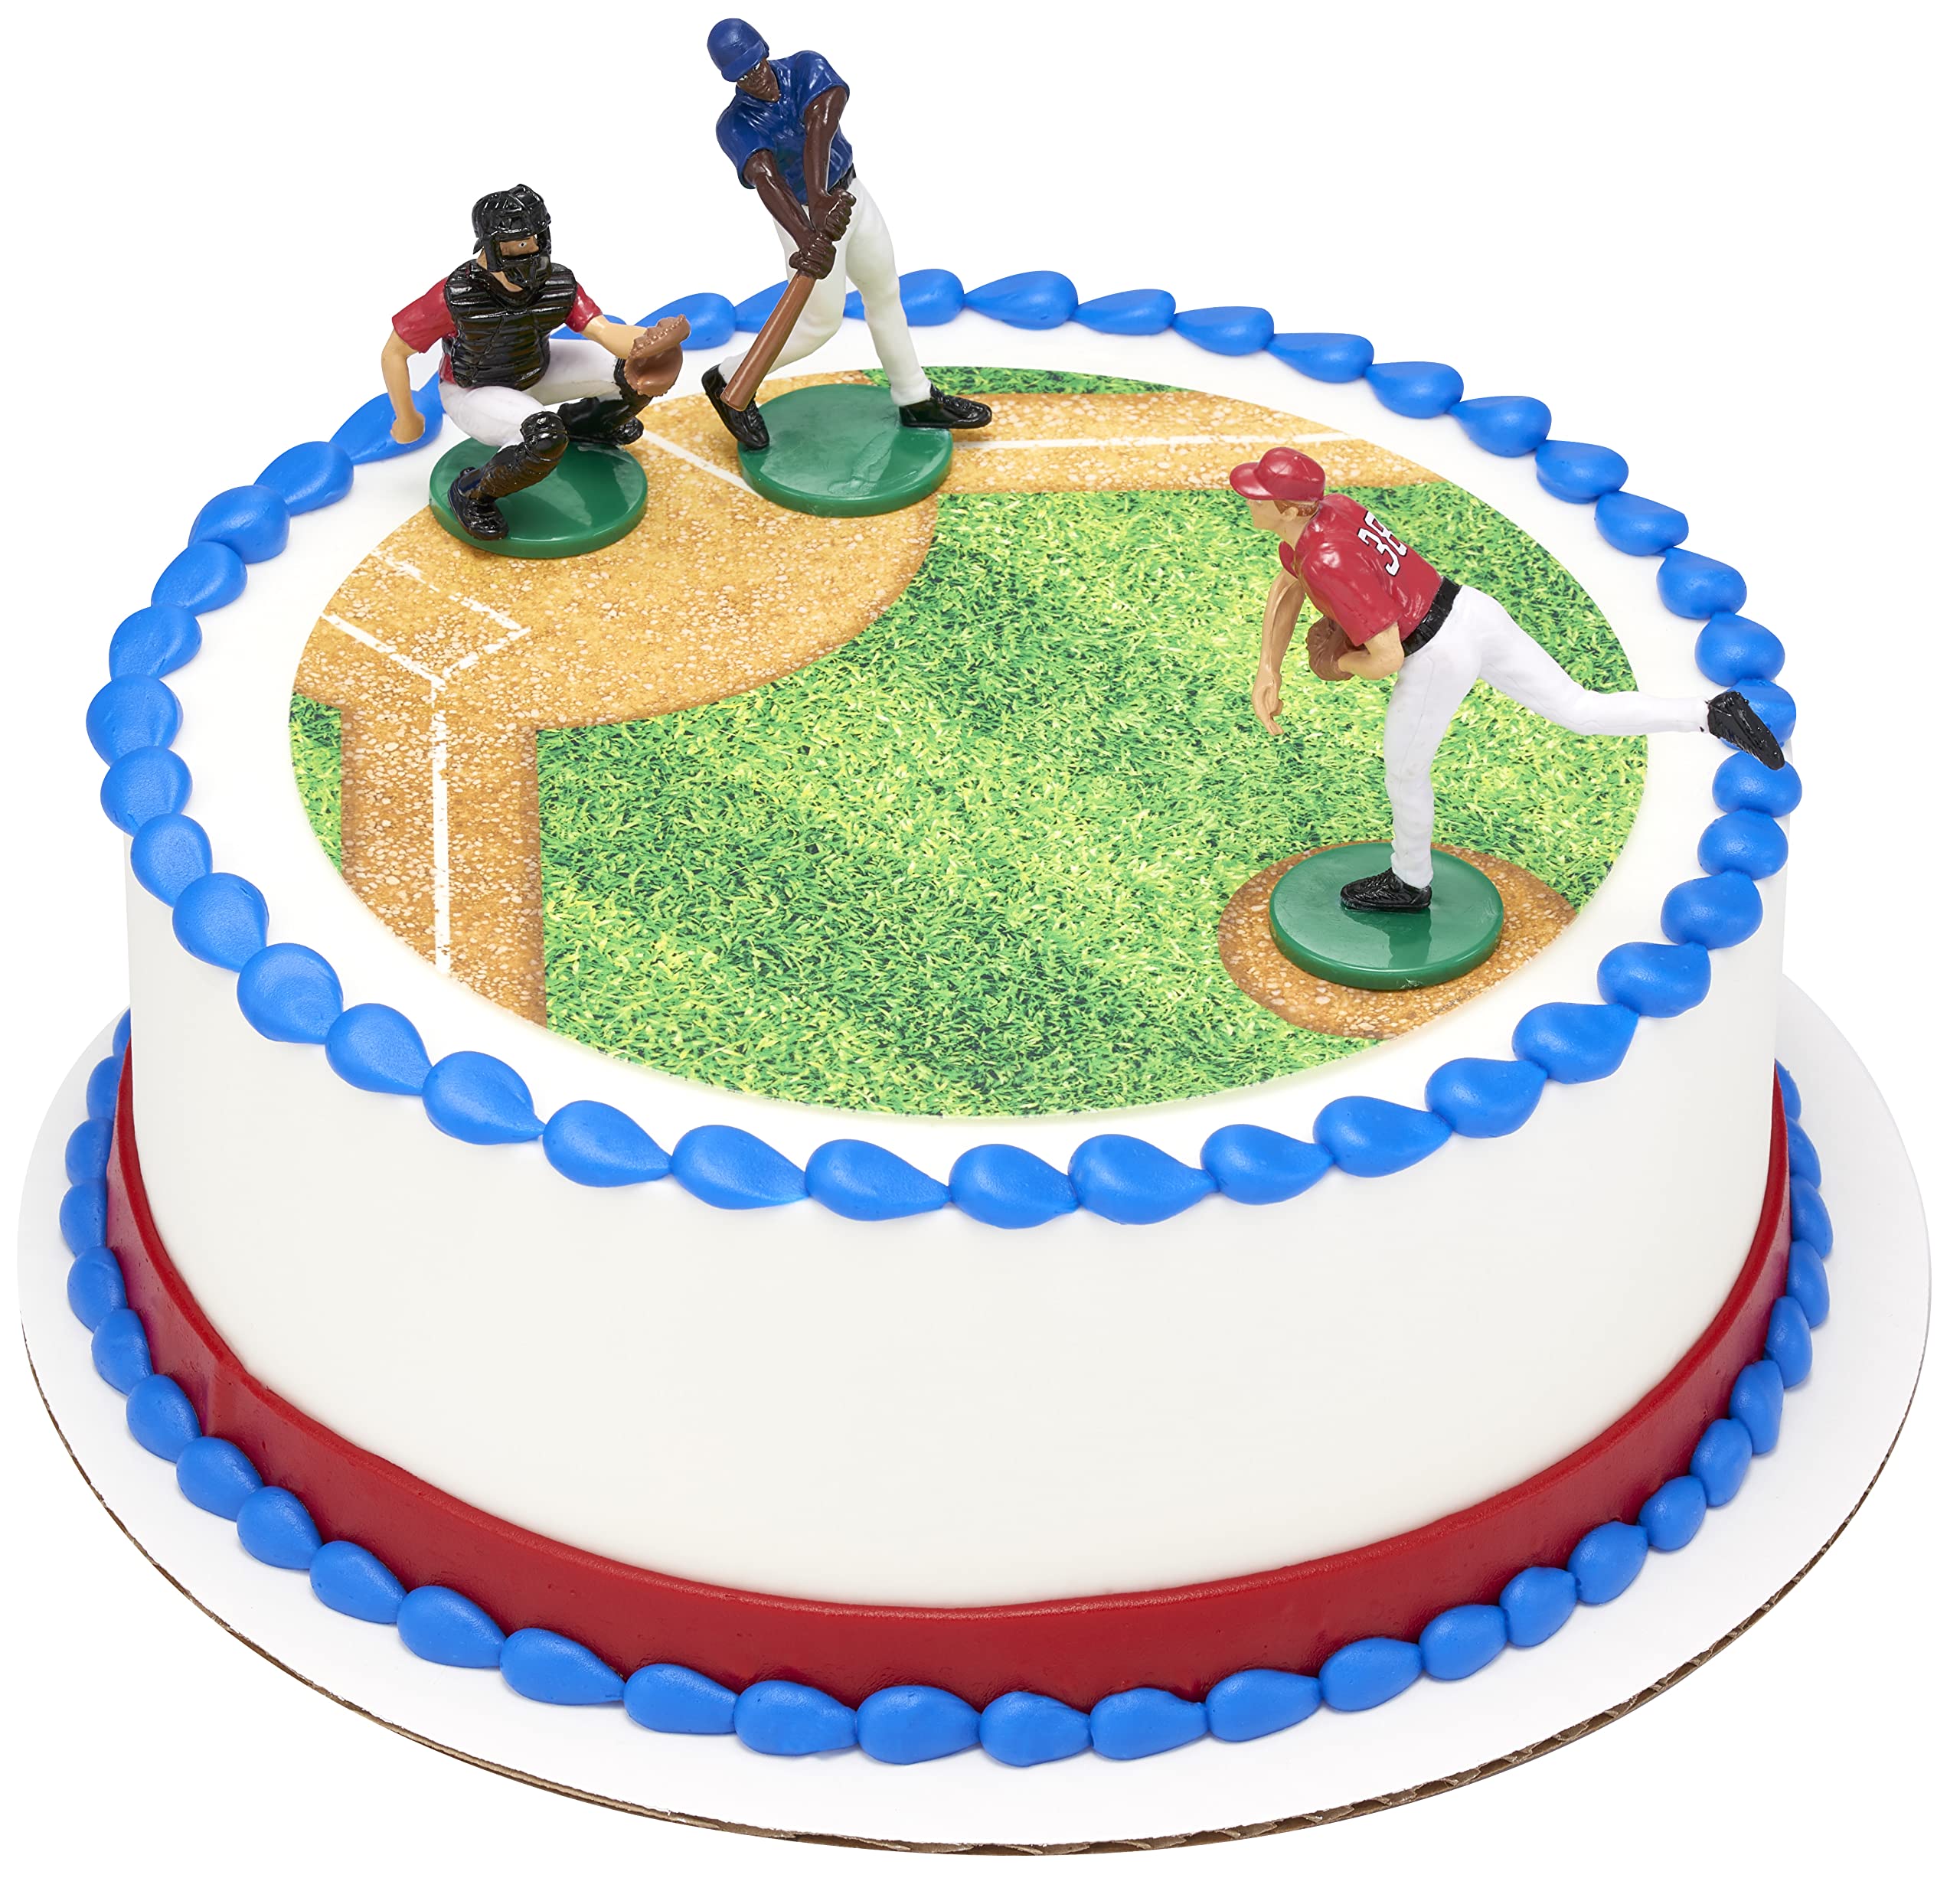 DecoPac Batter Up 3 Piece Decorations Set, Cake and Cupcake Toppers for Baseball Themed Birthdays, Celebrations, and Parties, Food Safe, Re-usable, Red, Blue original version